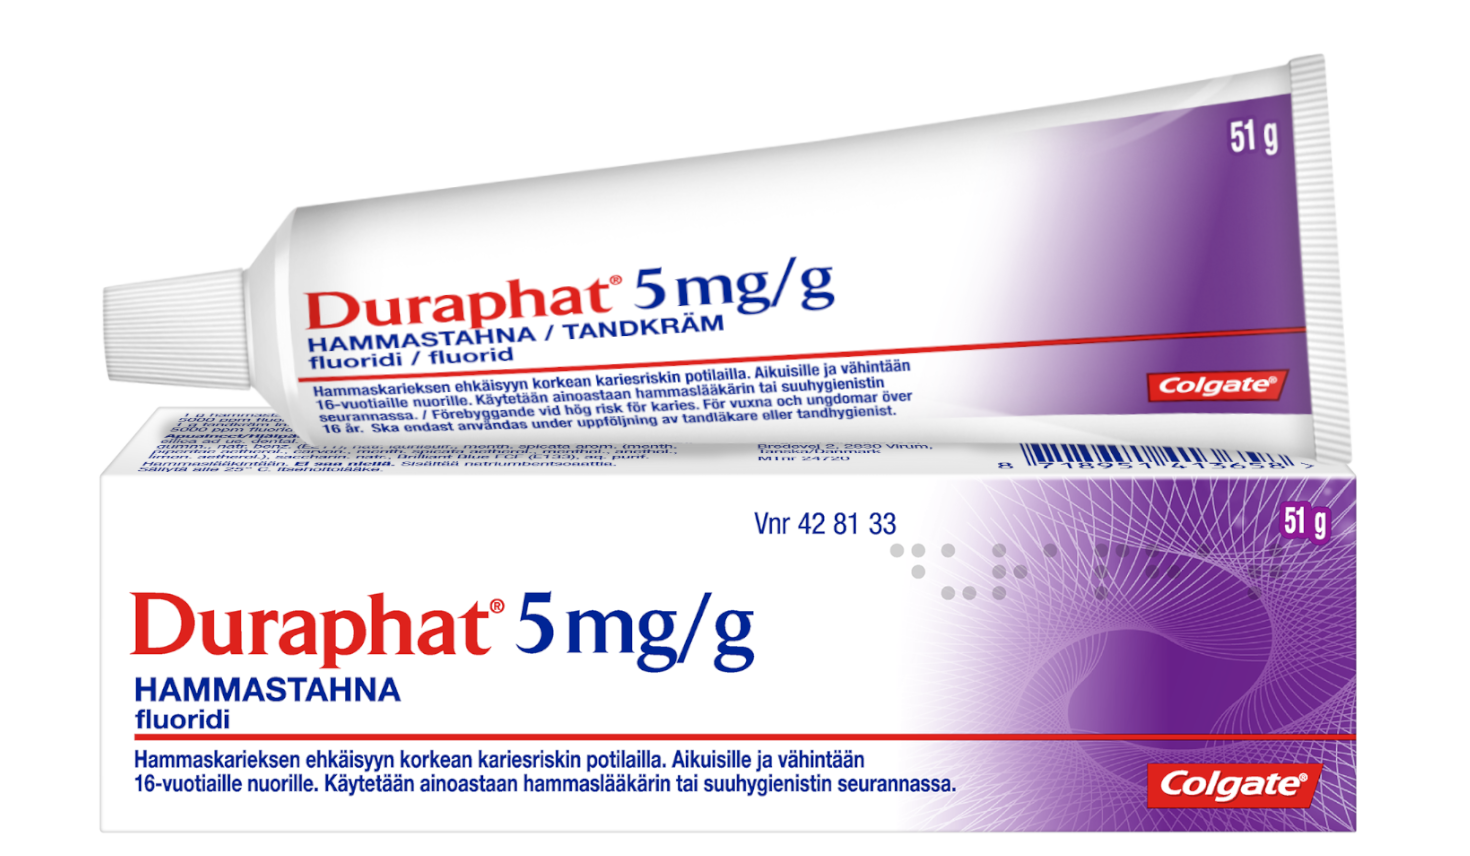 Duraphat products